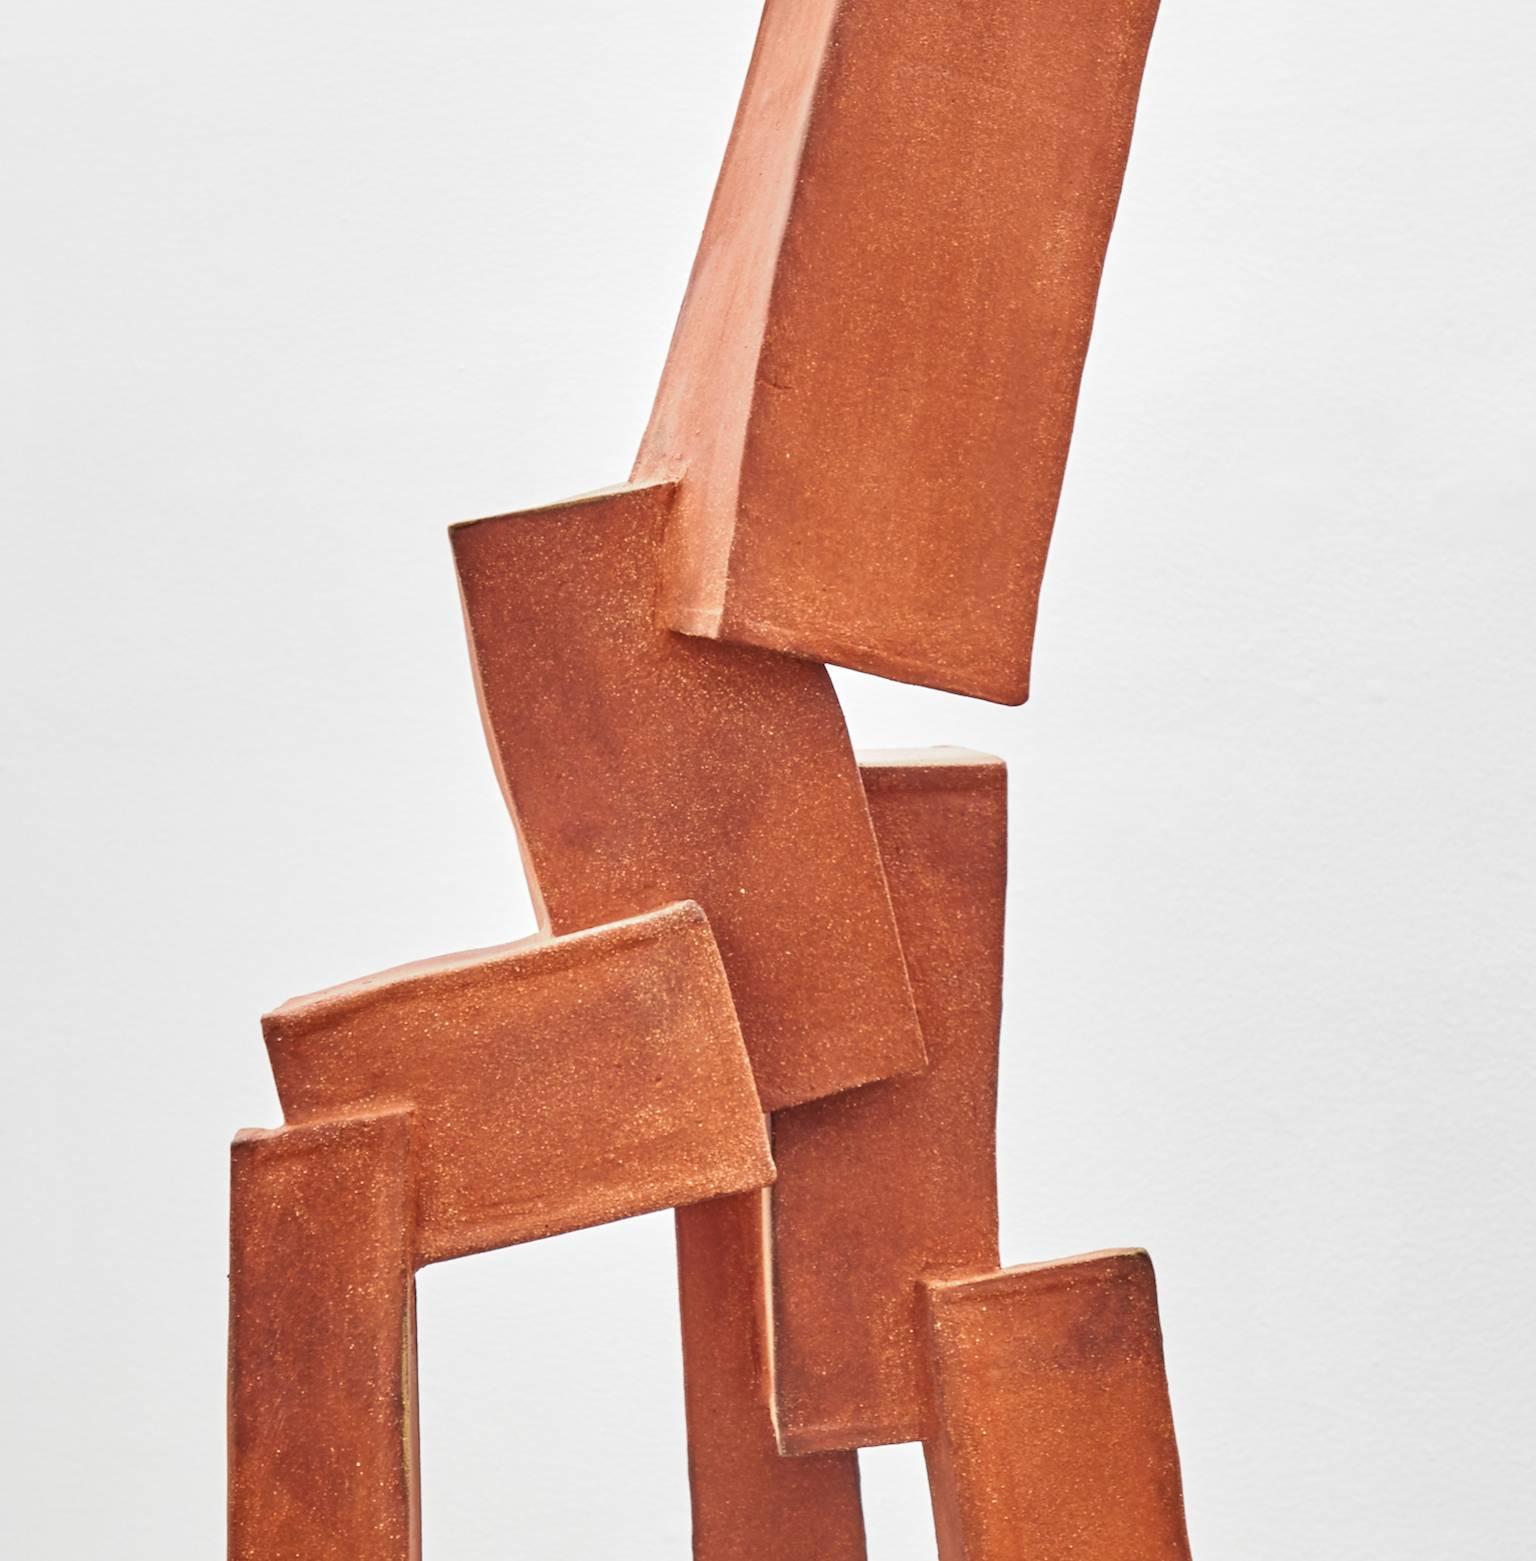 Untitled (U.S. #1) - Sculpture by Todd Kelly